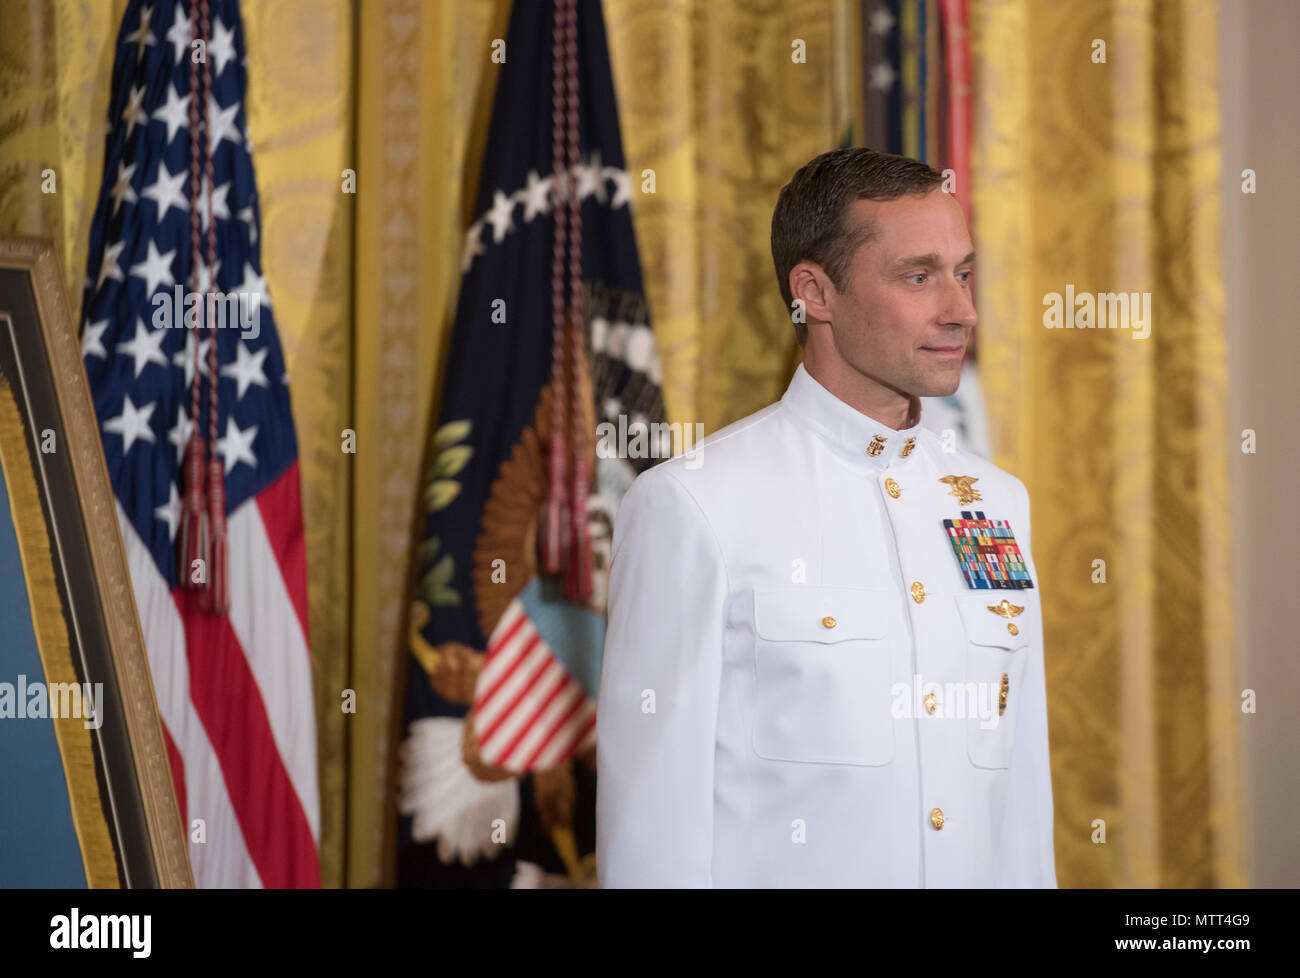 180524-N-BB269-006  WASHINGTON (May 24, 2018) Retired Master Chief Special Warfare Operator (SEAL) Britt Slabinski stands at attention during a Medal of Honor ceremony at the White House in Washington, D.C. Slabinski received the Medal of Honor for his actions during Operation Anaconda in Afghanistan in March 2002. (U.S. Navy photo by Mass Communication Specialist 1st Class Raymond D. Diaz III/Released) Stock Photo